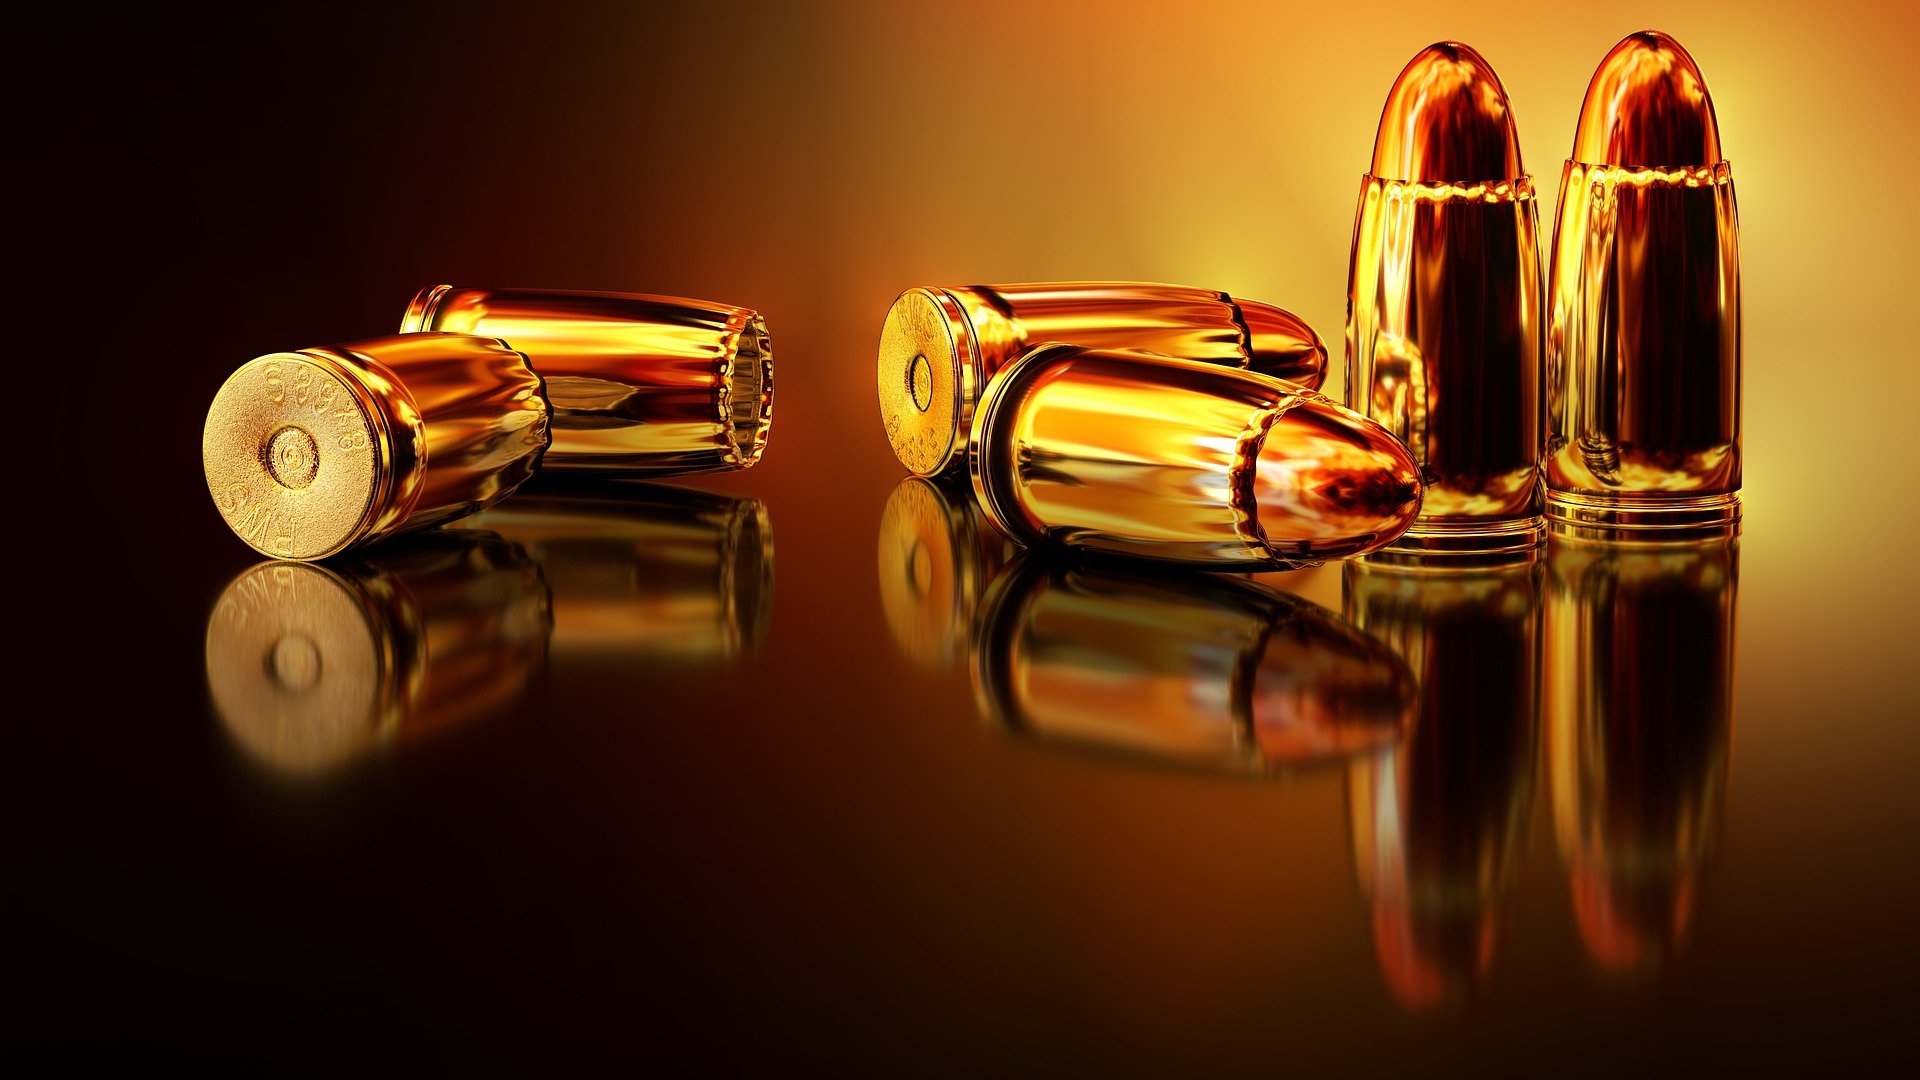 Pictured - A photo of bullet shells | Source: Pixabay